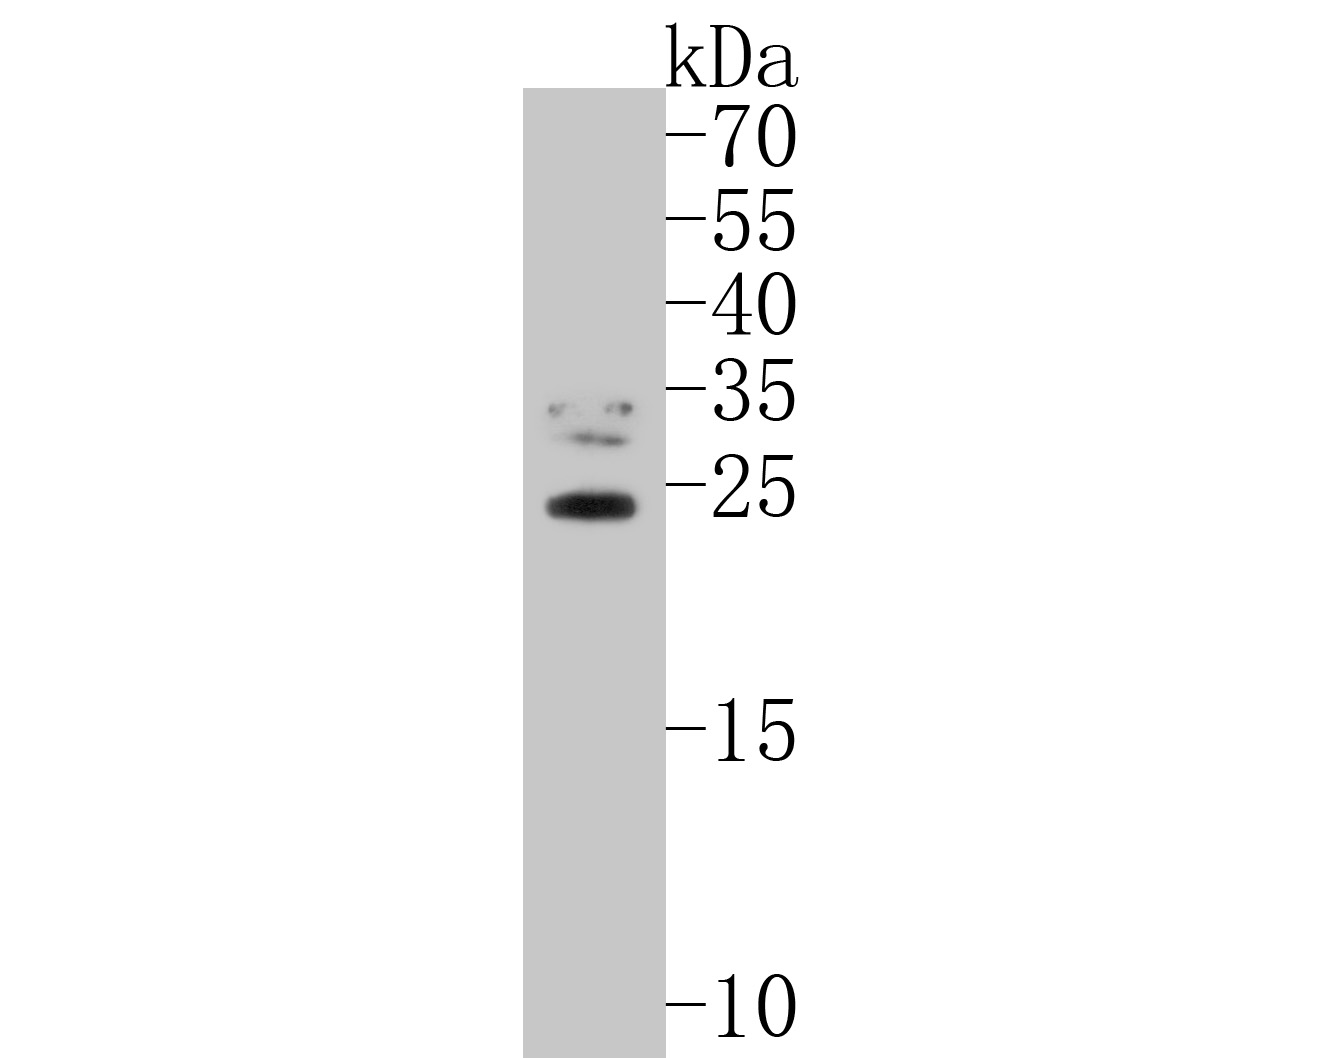 Western blot analysis of TIFY11A on rice tissue lysates. Proteins were transferred to a PVDF membrane and blocked with 5% NFDM/TBST for 1 hour at room temperature. The primary antibody (HA500265, 1/1,000) was used in 5% NFDM/TBST at room temperature for 2 hours. Goat Anti-Rabbit IgG - HRP Secondary Antibody (HA1001) at 1:200,000 dilution was used for 1 hour at room temperature.